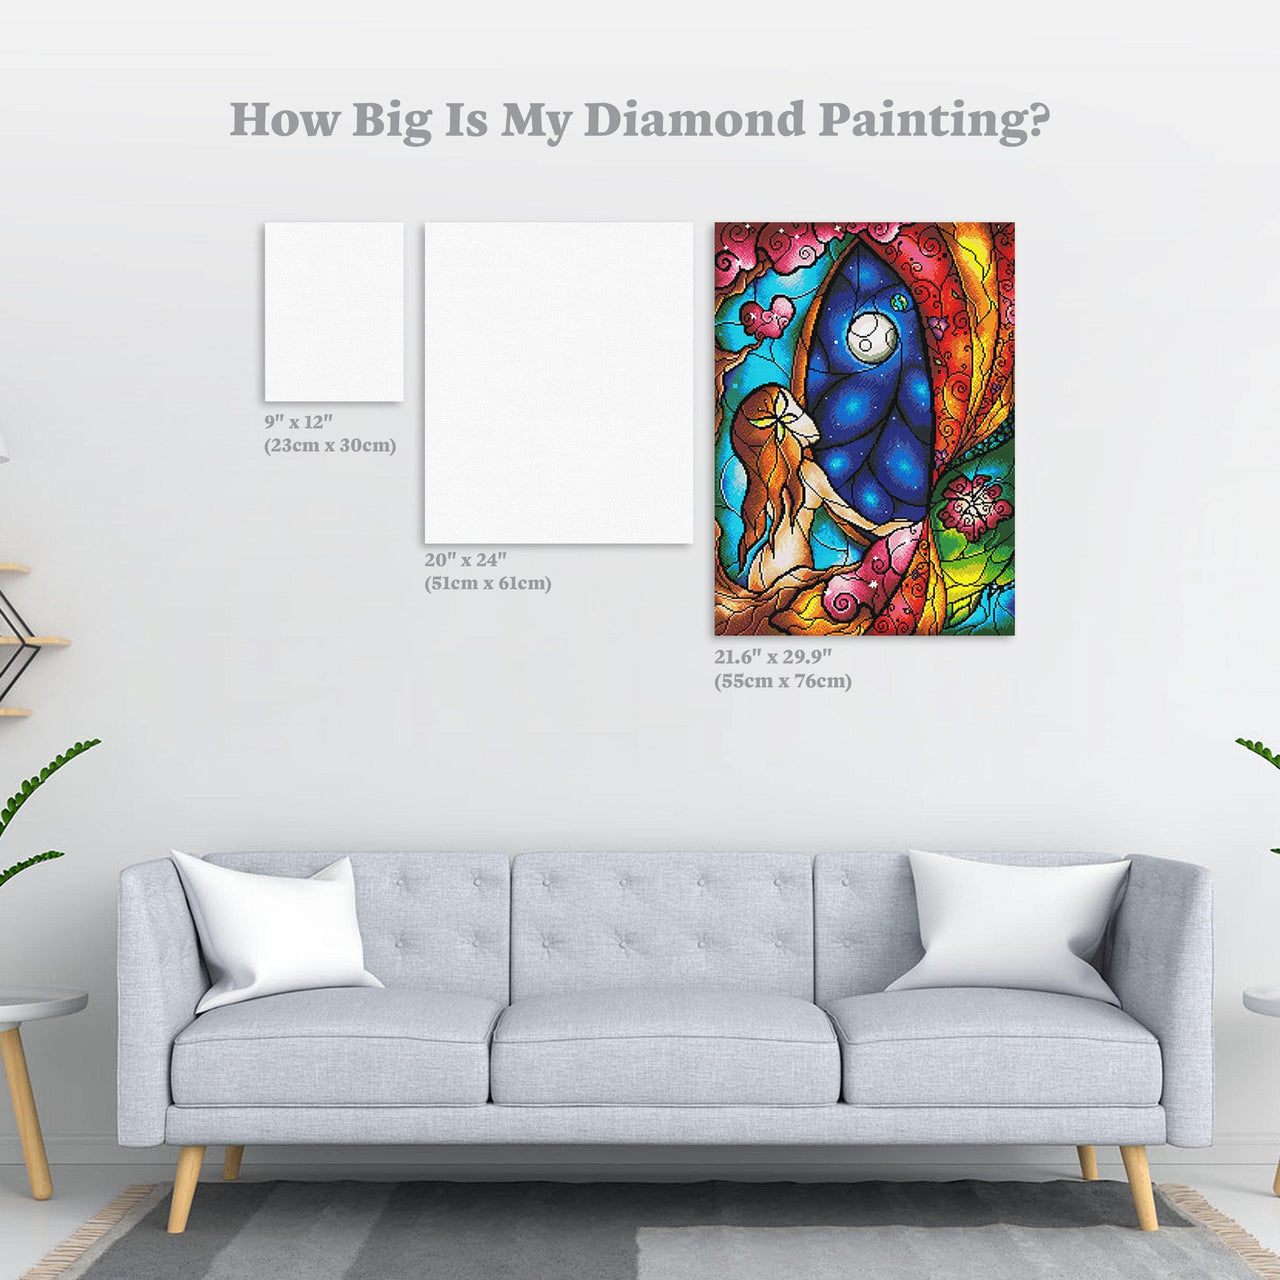 Diamond Painting I Miss You 21.6" x 29.9" (55cm x 76cm) / Round With 41 Colors including 2 ABs / 52,457